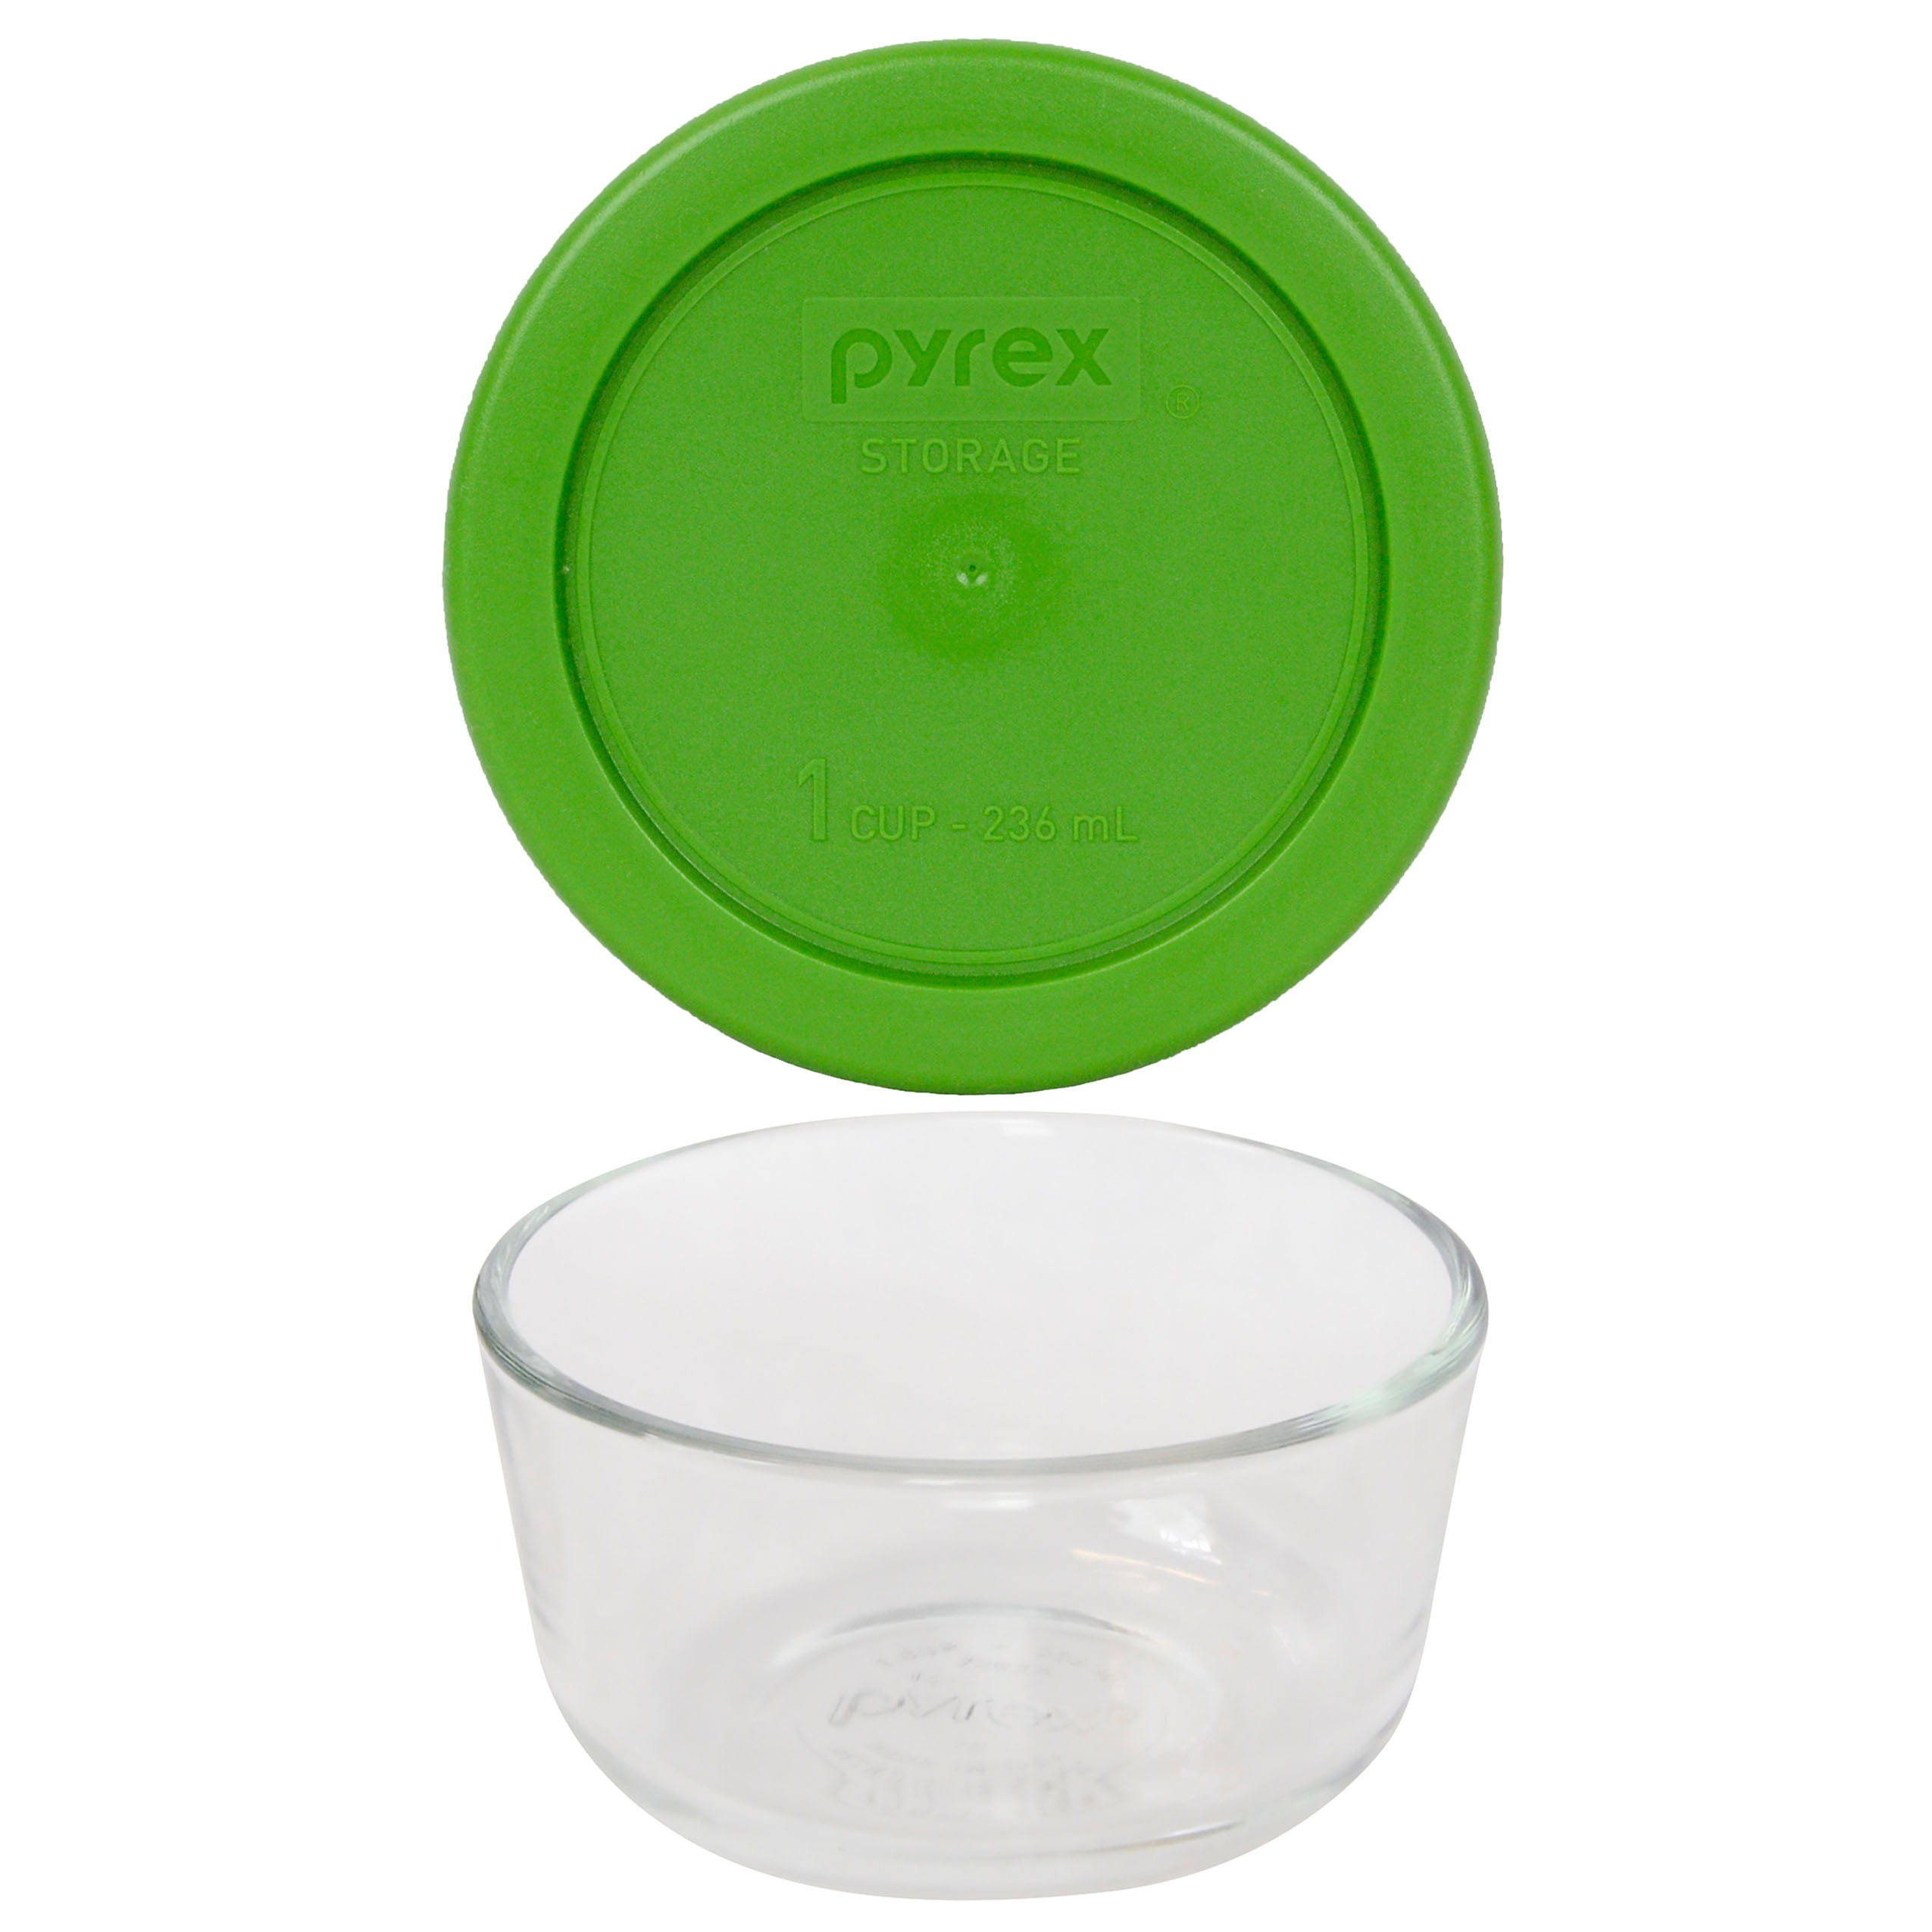 Pyrex 7201 4-Cup Round Glass Food Storage Bowl w/ 7201-PC Jet Gray Lid Cover